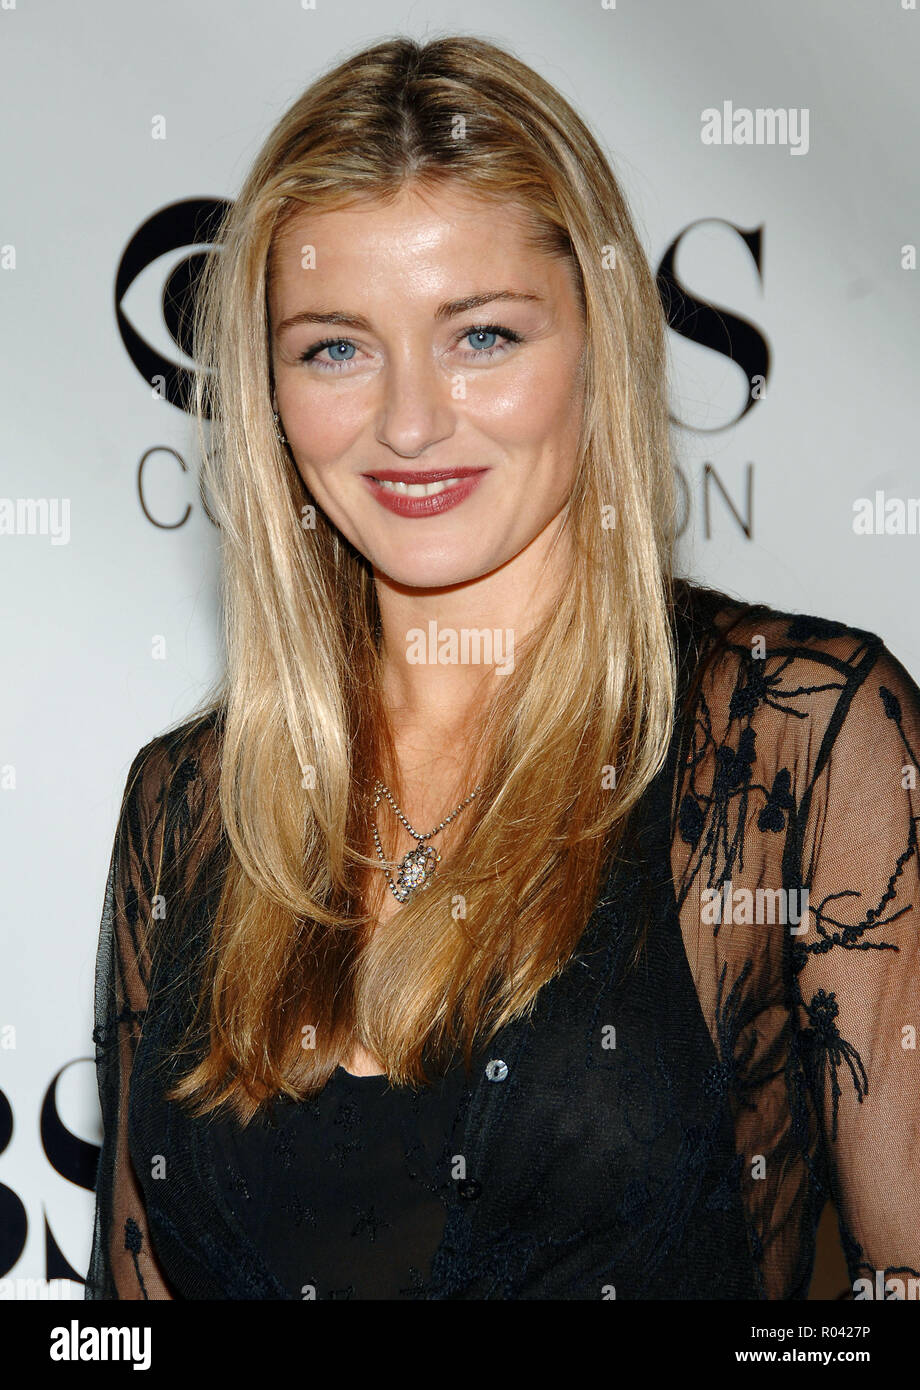 Louise Lombard arriving at the CBS - Paramount - UPN - Showtime Party at the Wind Tunnel in Pasadena. January 18, 2006.LombardLouise169 Red Carpet Event, Vertical, USA, Film Industry, Celebrities,  Photography, Bestof, Arts Culture and Entertainment, Topix Celebrities fashion /  Vertical, Best of, Event in Hollywood Life - California,  Red Carpet and backstage, USA, Film Industry, Celebrities,  movie celebrities, TV celebrities, Music celebrities, Photography, Bestof, Arts Culture and Entertainment,  Topix, headshot, vertical, one person,, from the year , 2005, inquiry tsuni@Gamma-USA.com Stock Photo